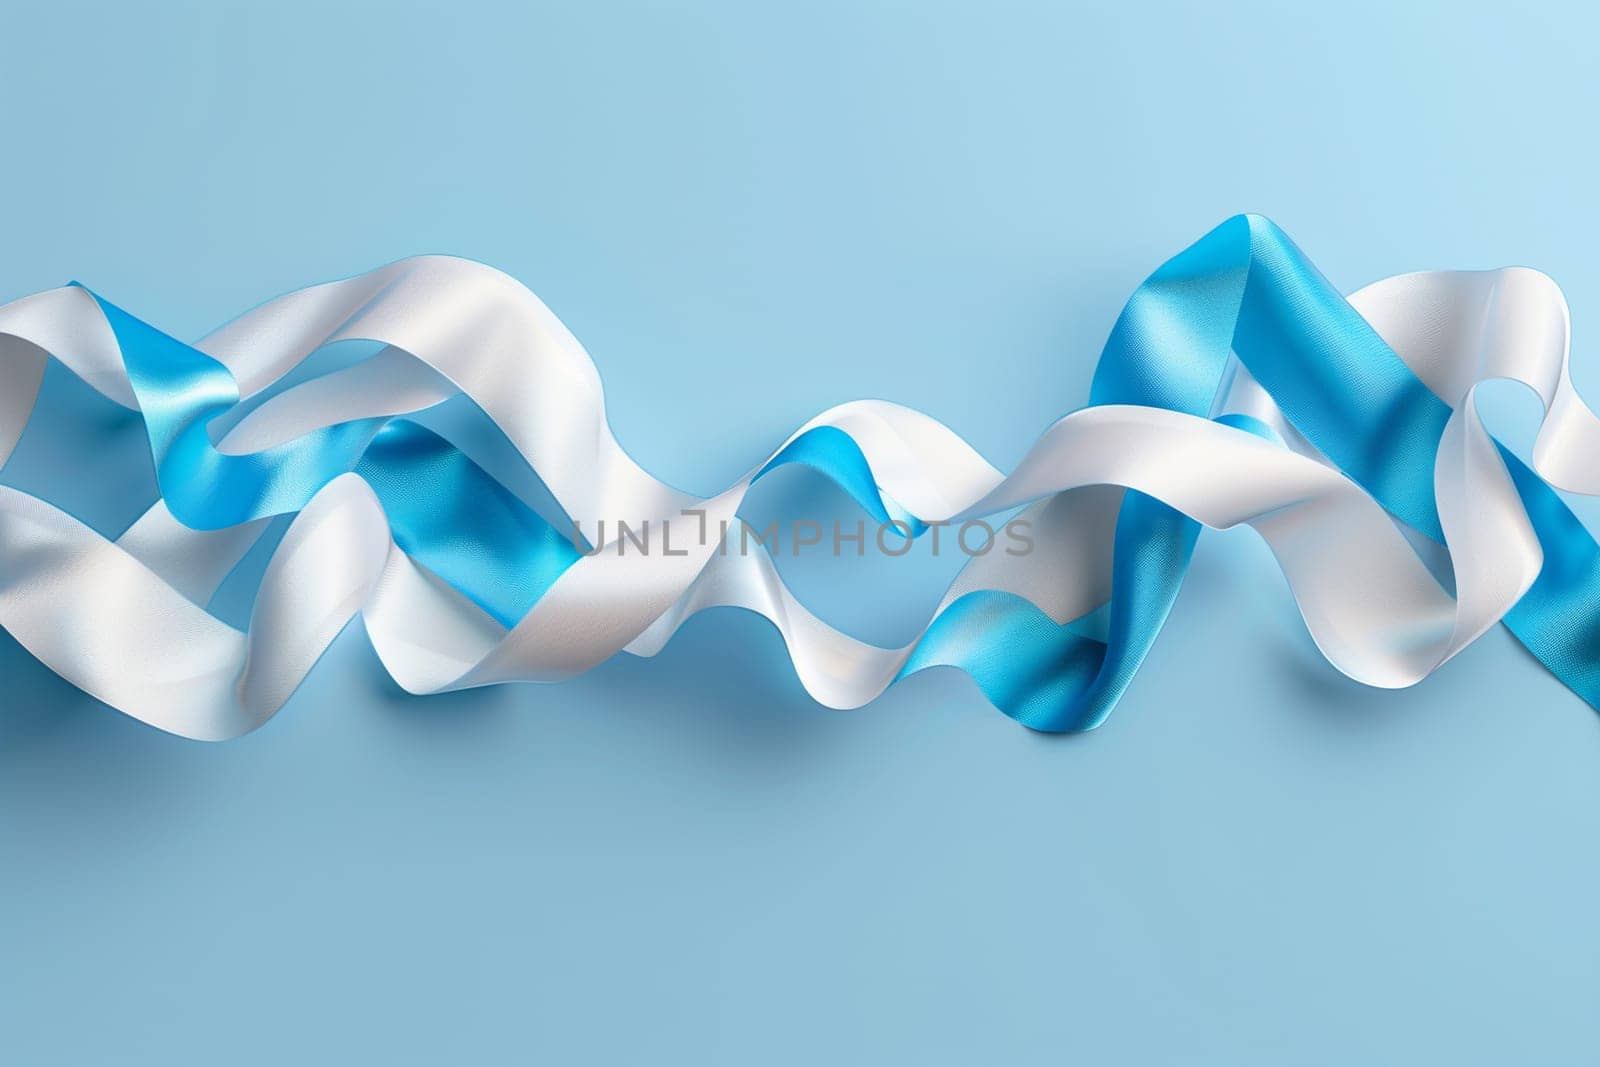 A blue and white ribbon elegantly placed on a plain blue background, symbolizing the colors of the Argentinian flag on Flag Day.